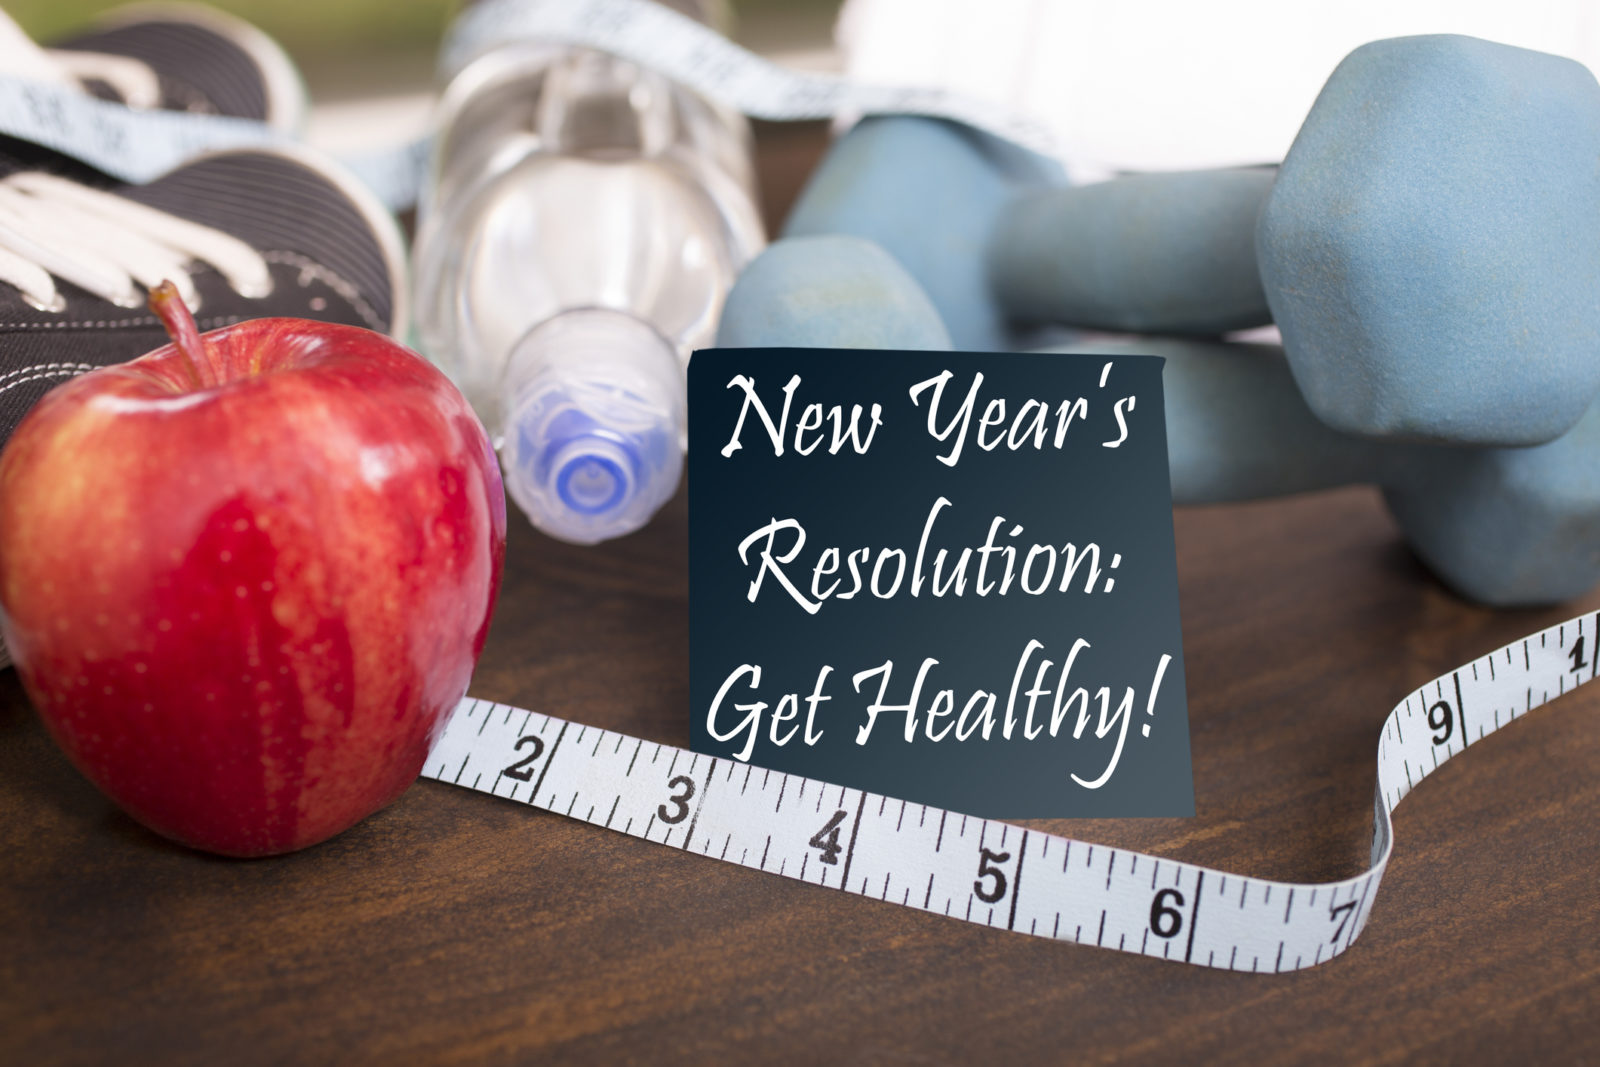 New Year's Resolution to get healthy in January of the coming year. Image features: dumbbells, sports shoes, water bottle, apple, towel, tape measure on wooden table. Adhesive note reading "New Year's Resolution: Get Healthy!" in foreground.